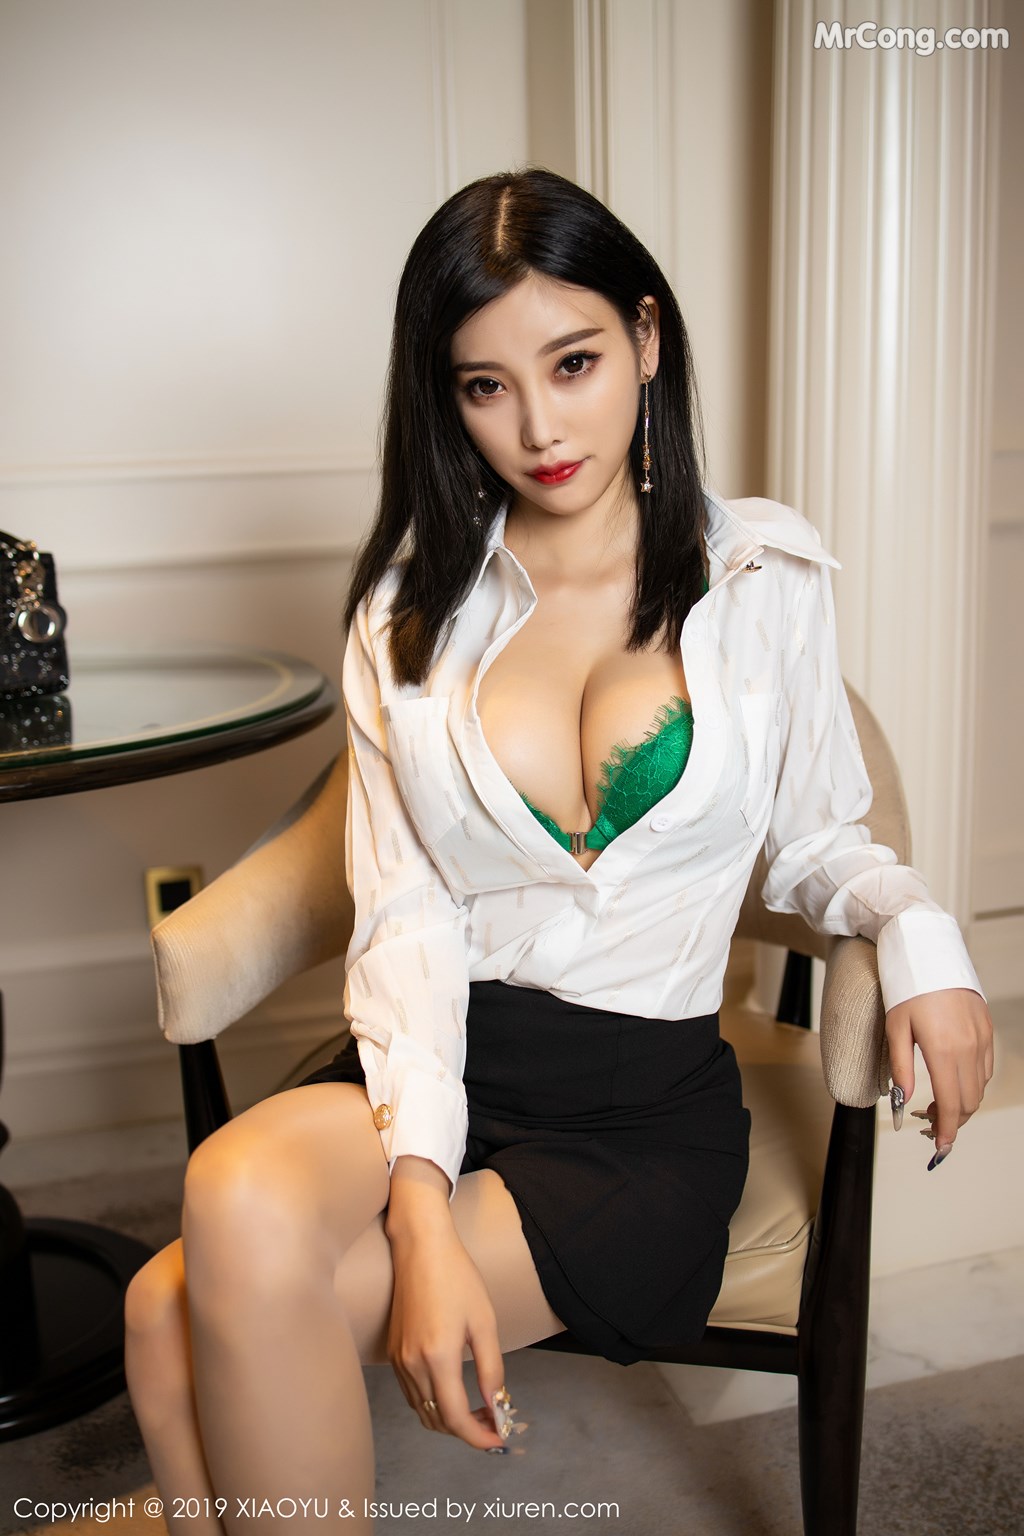 XiaoYu Vol. 225: Yang Chen Chen (杨晨晨 sugar) (70 pictures)